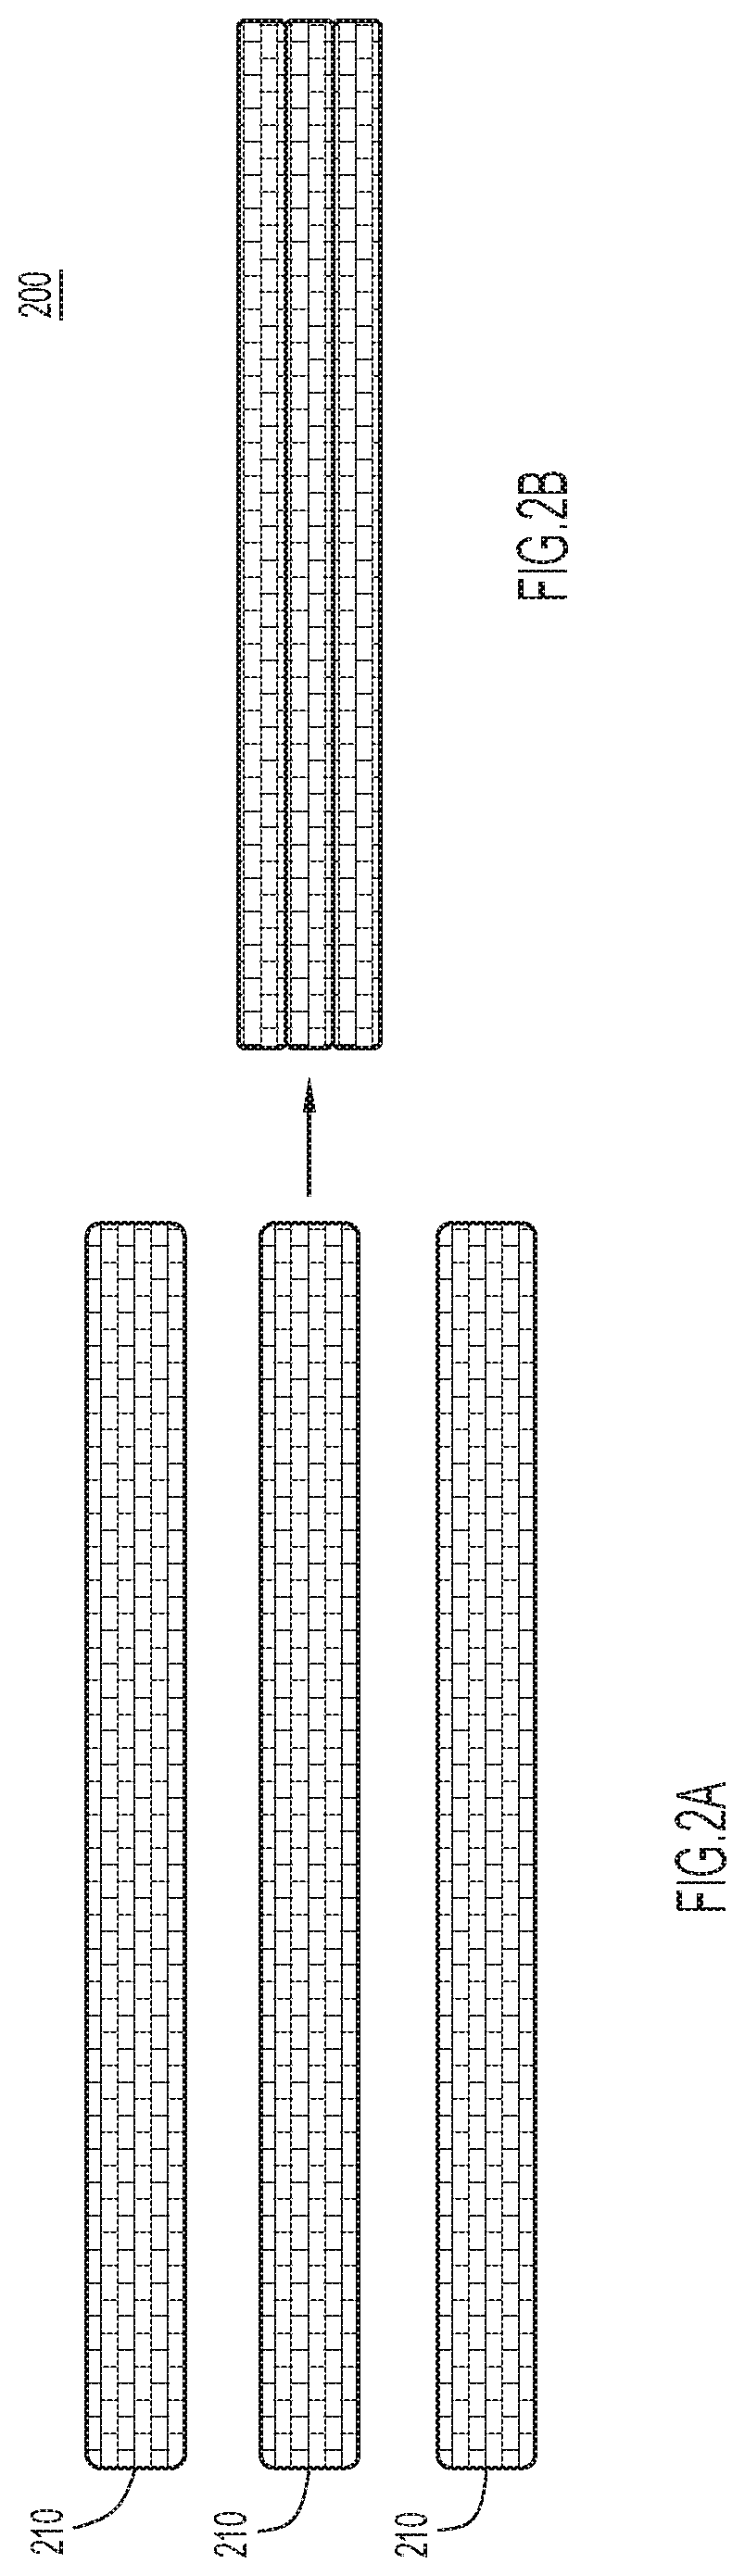 Multilayered biologic mesh and methods of use thereof